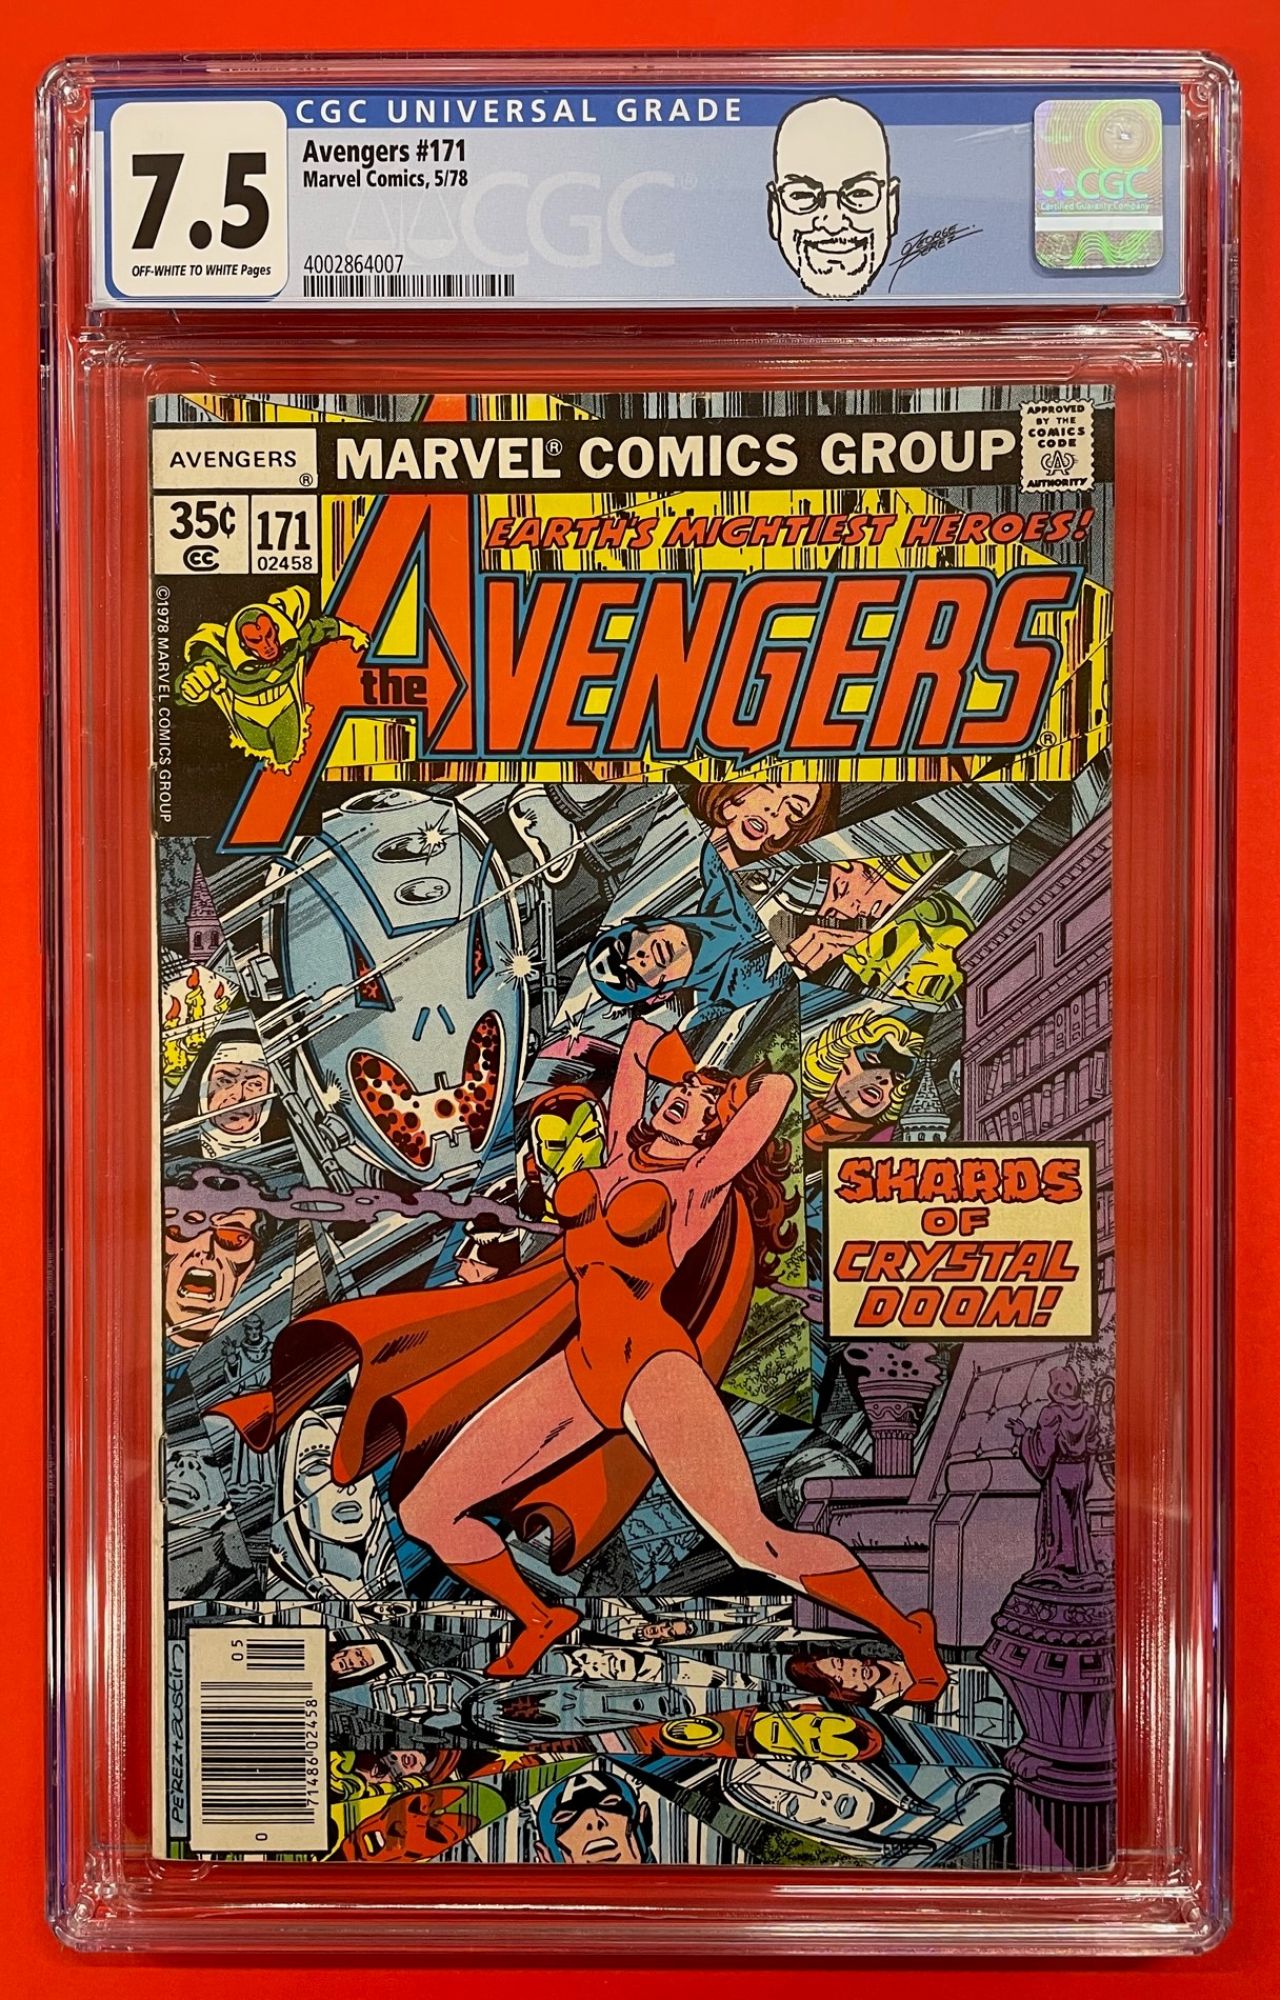 Avengers #171, May 1978, 7.5 VF- CGC Blue Label